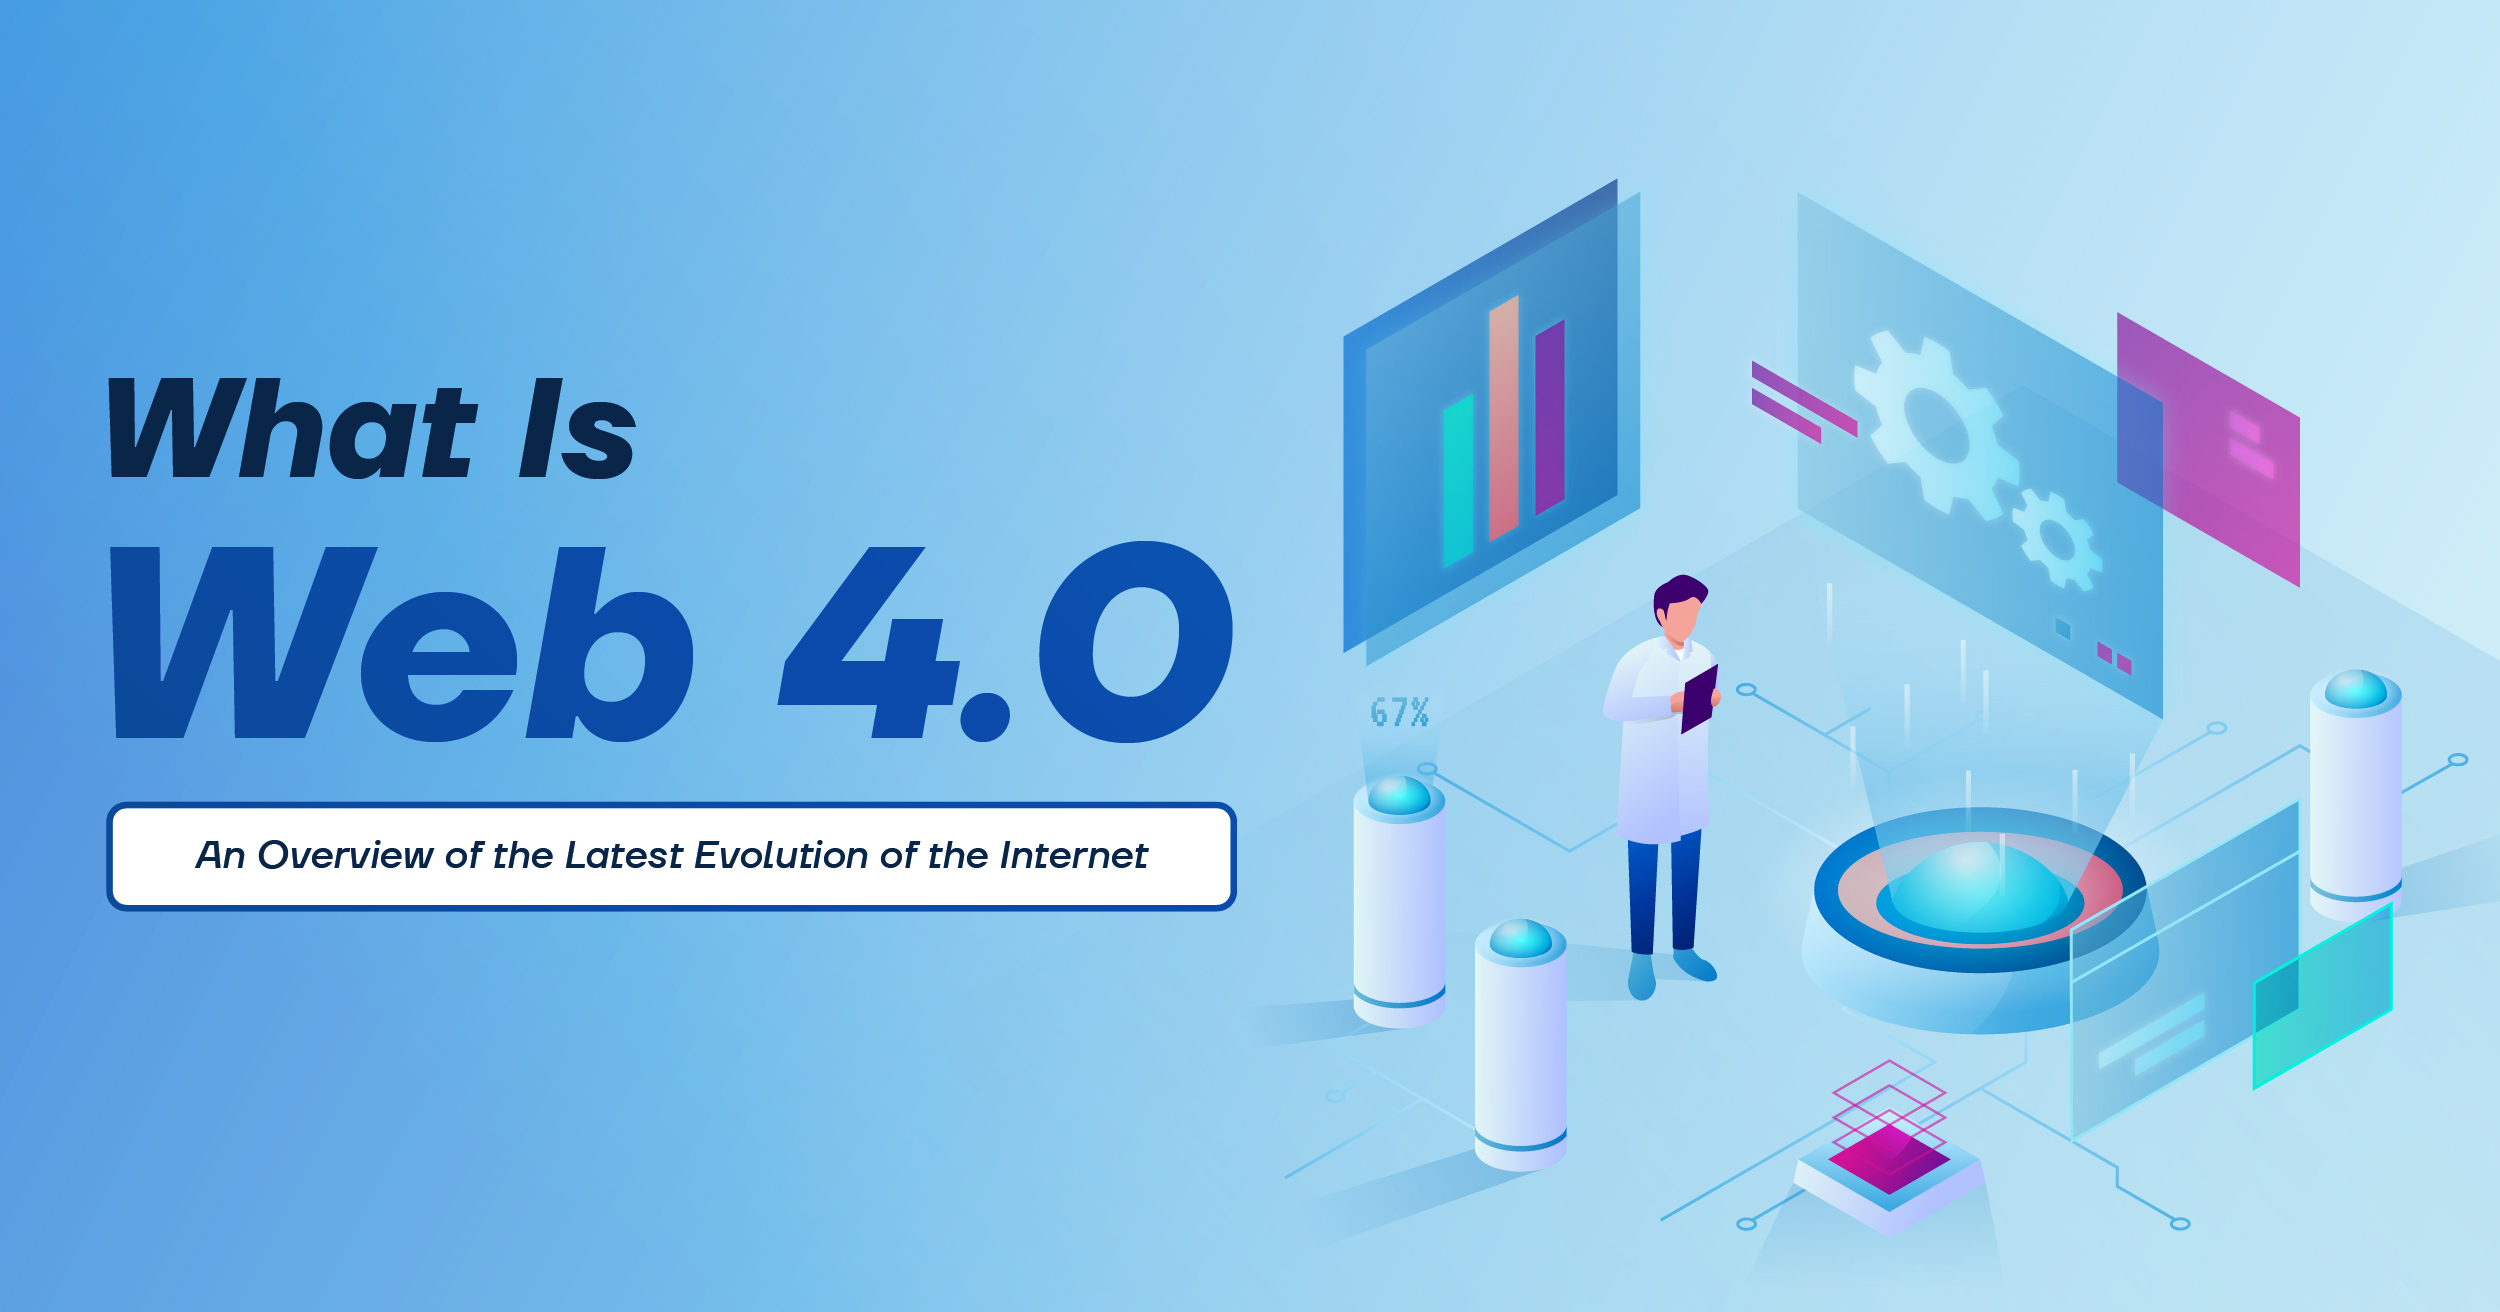 What is Web 4.0 explained